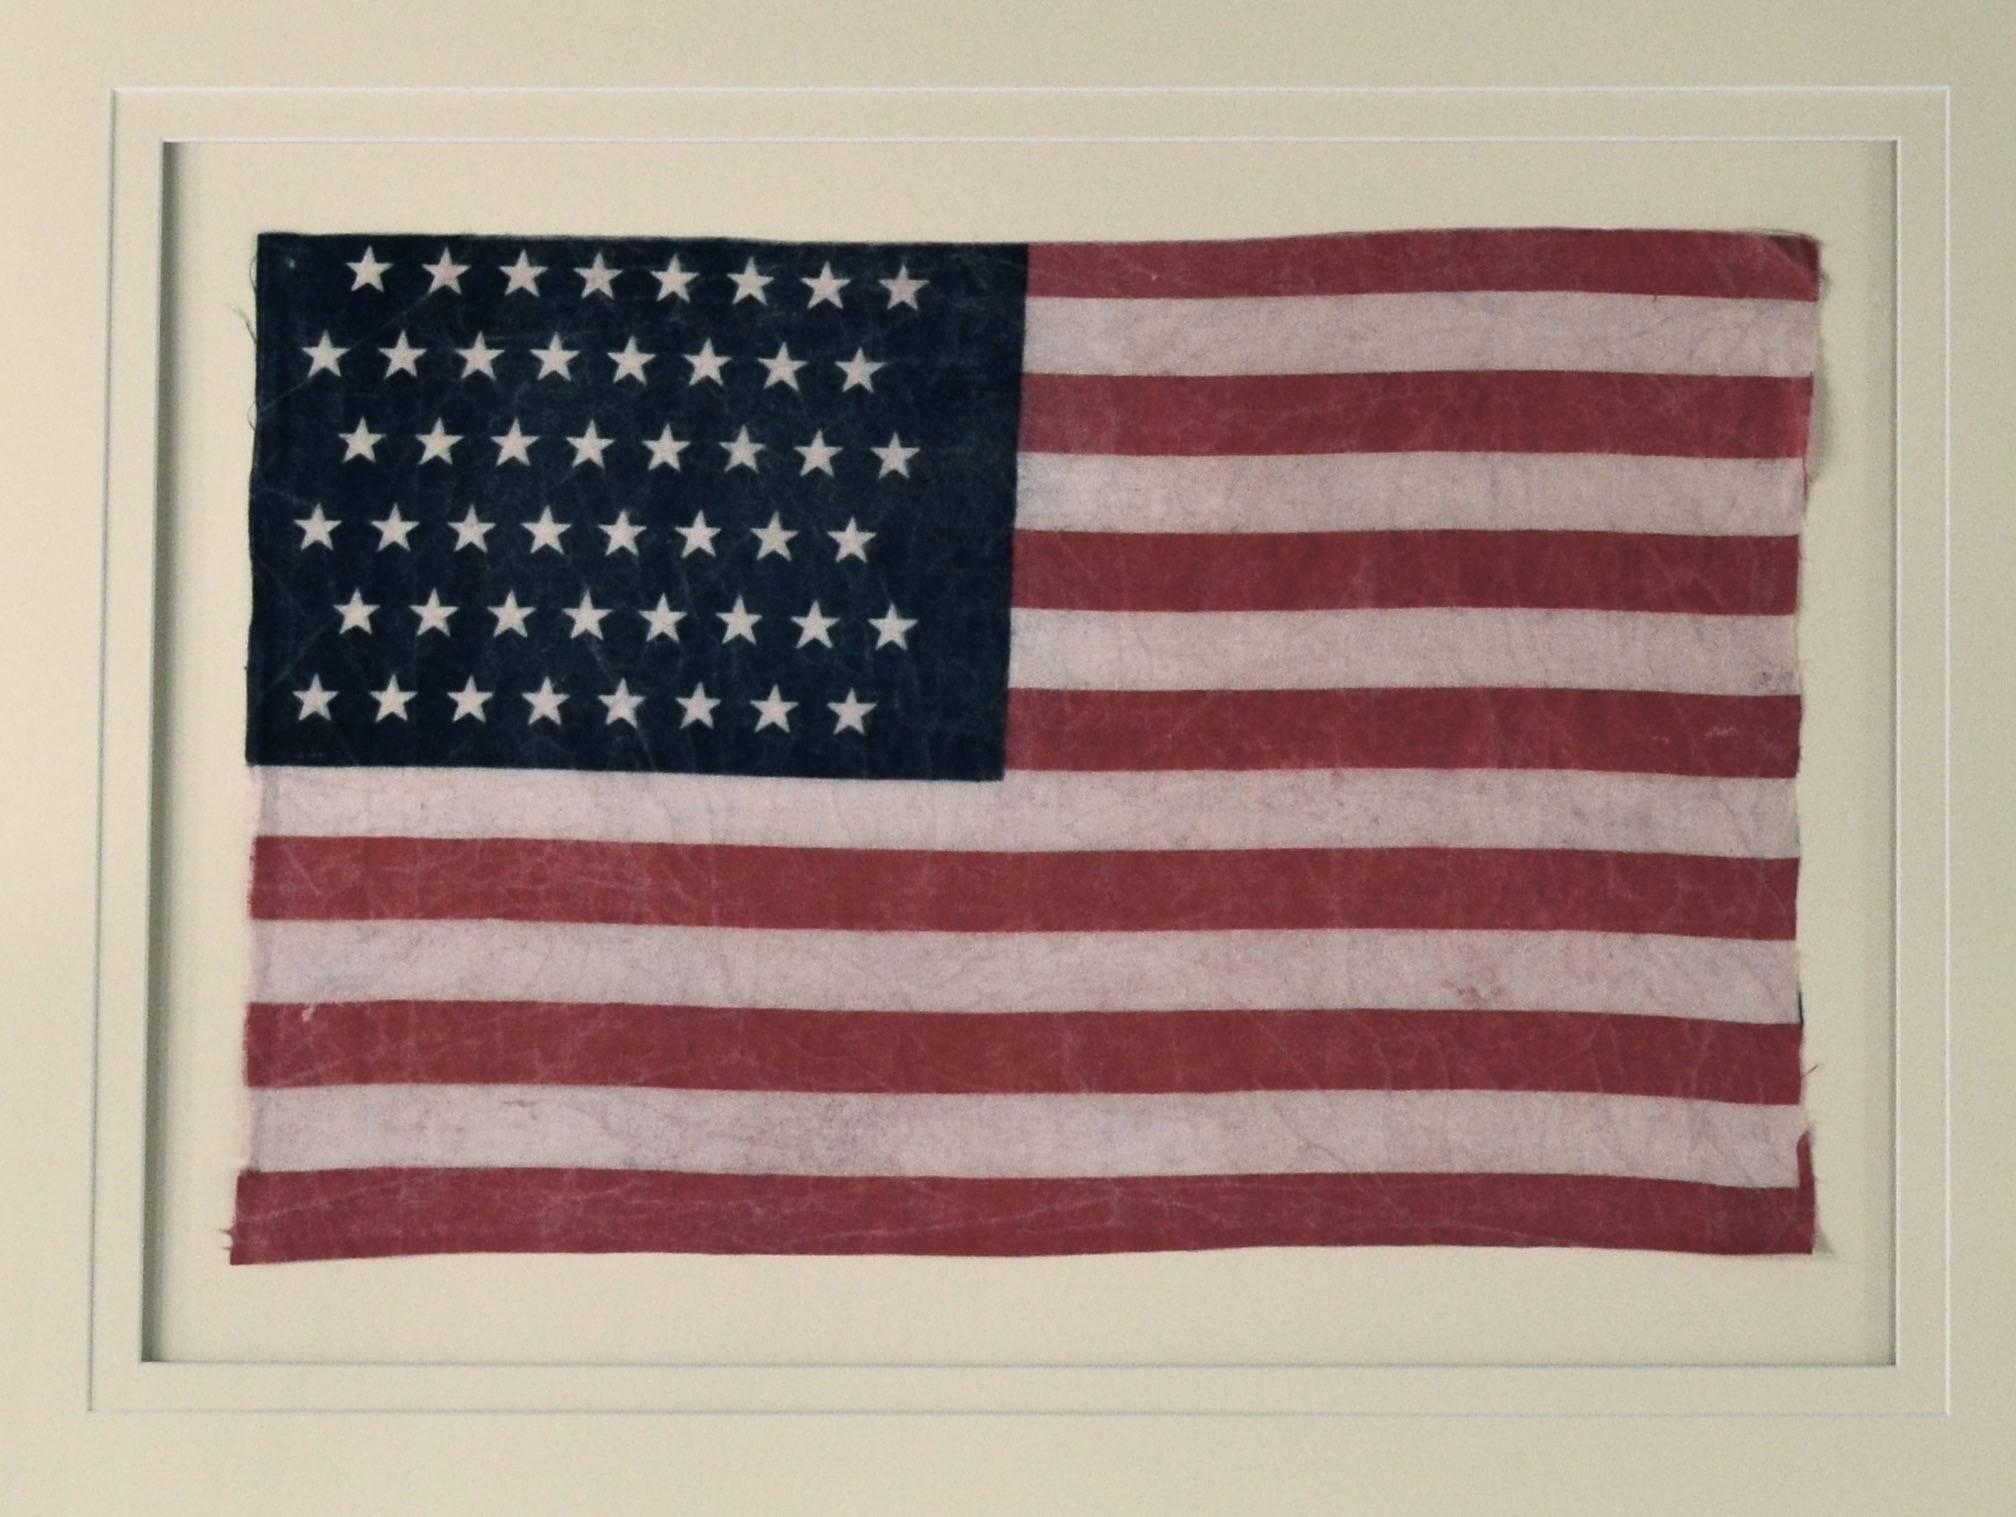 Authentic antique 48 Star flag. This particular star arrangement was only used for two years from 1912-1914 due to an executive order issued by President Taft to regulate the design and proportions to the American Flag. Made of printed